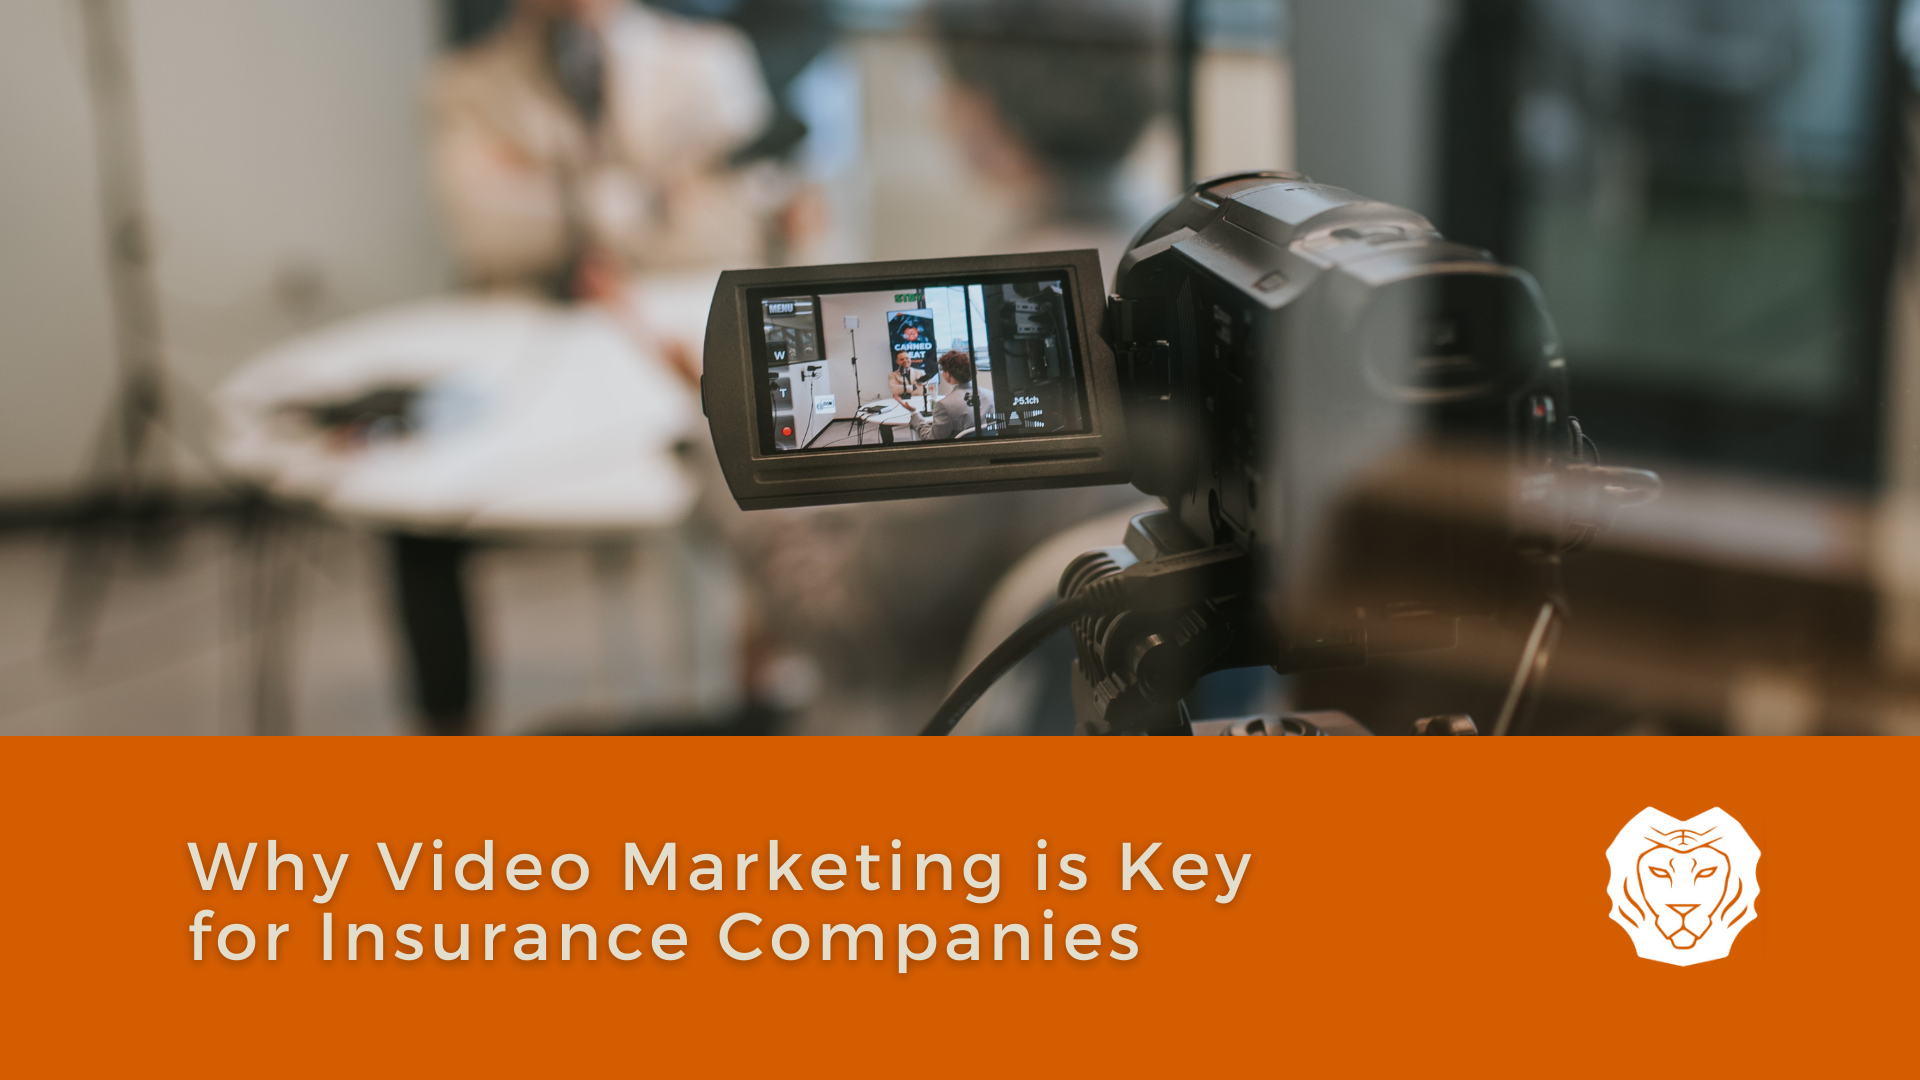 Why Video Marketing is Key for Insurance Companies